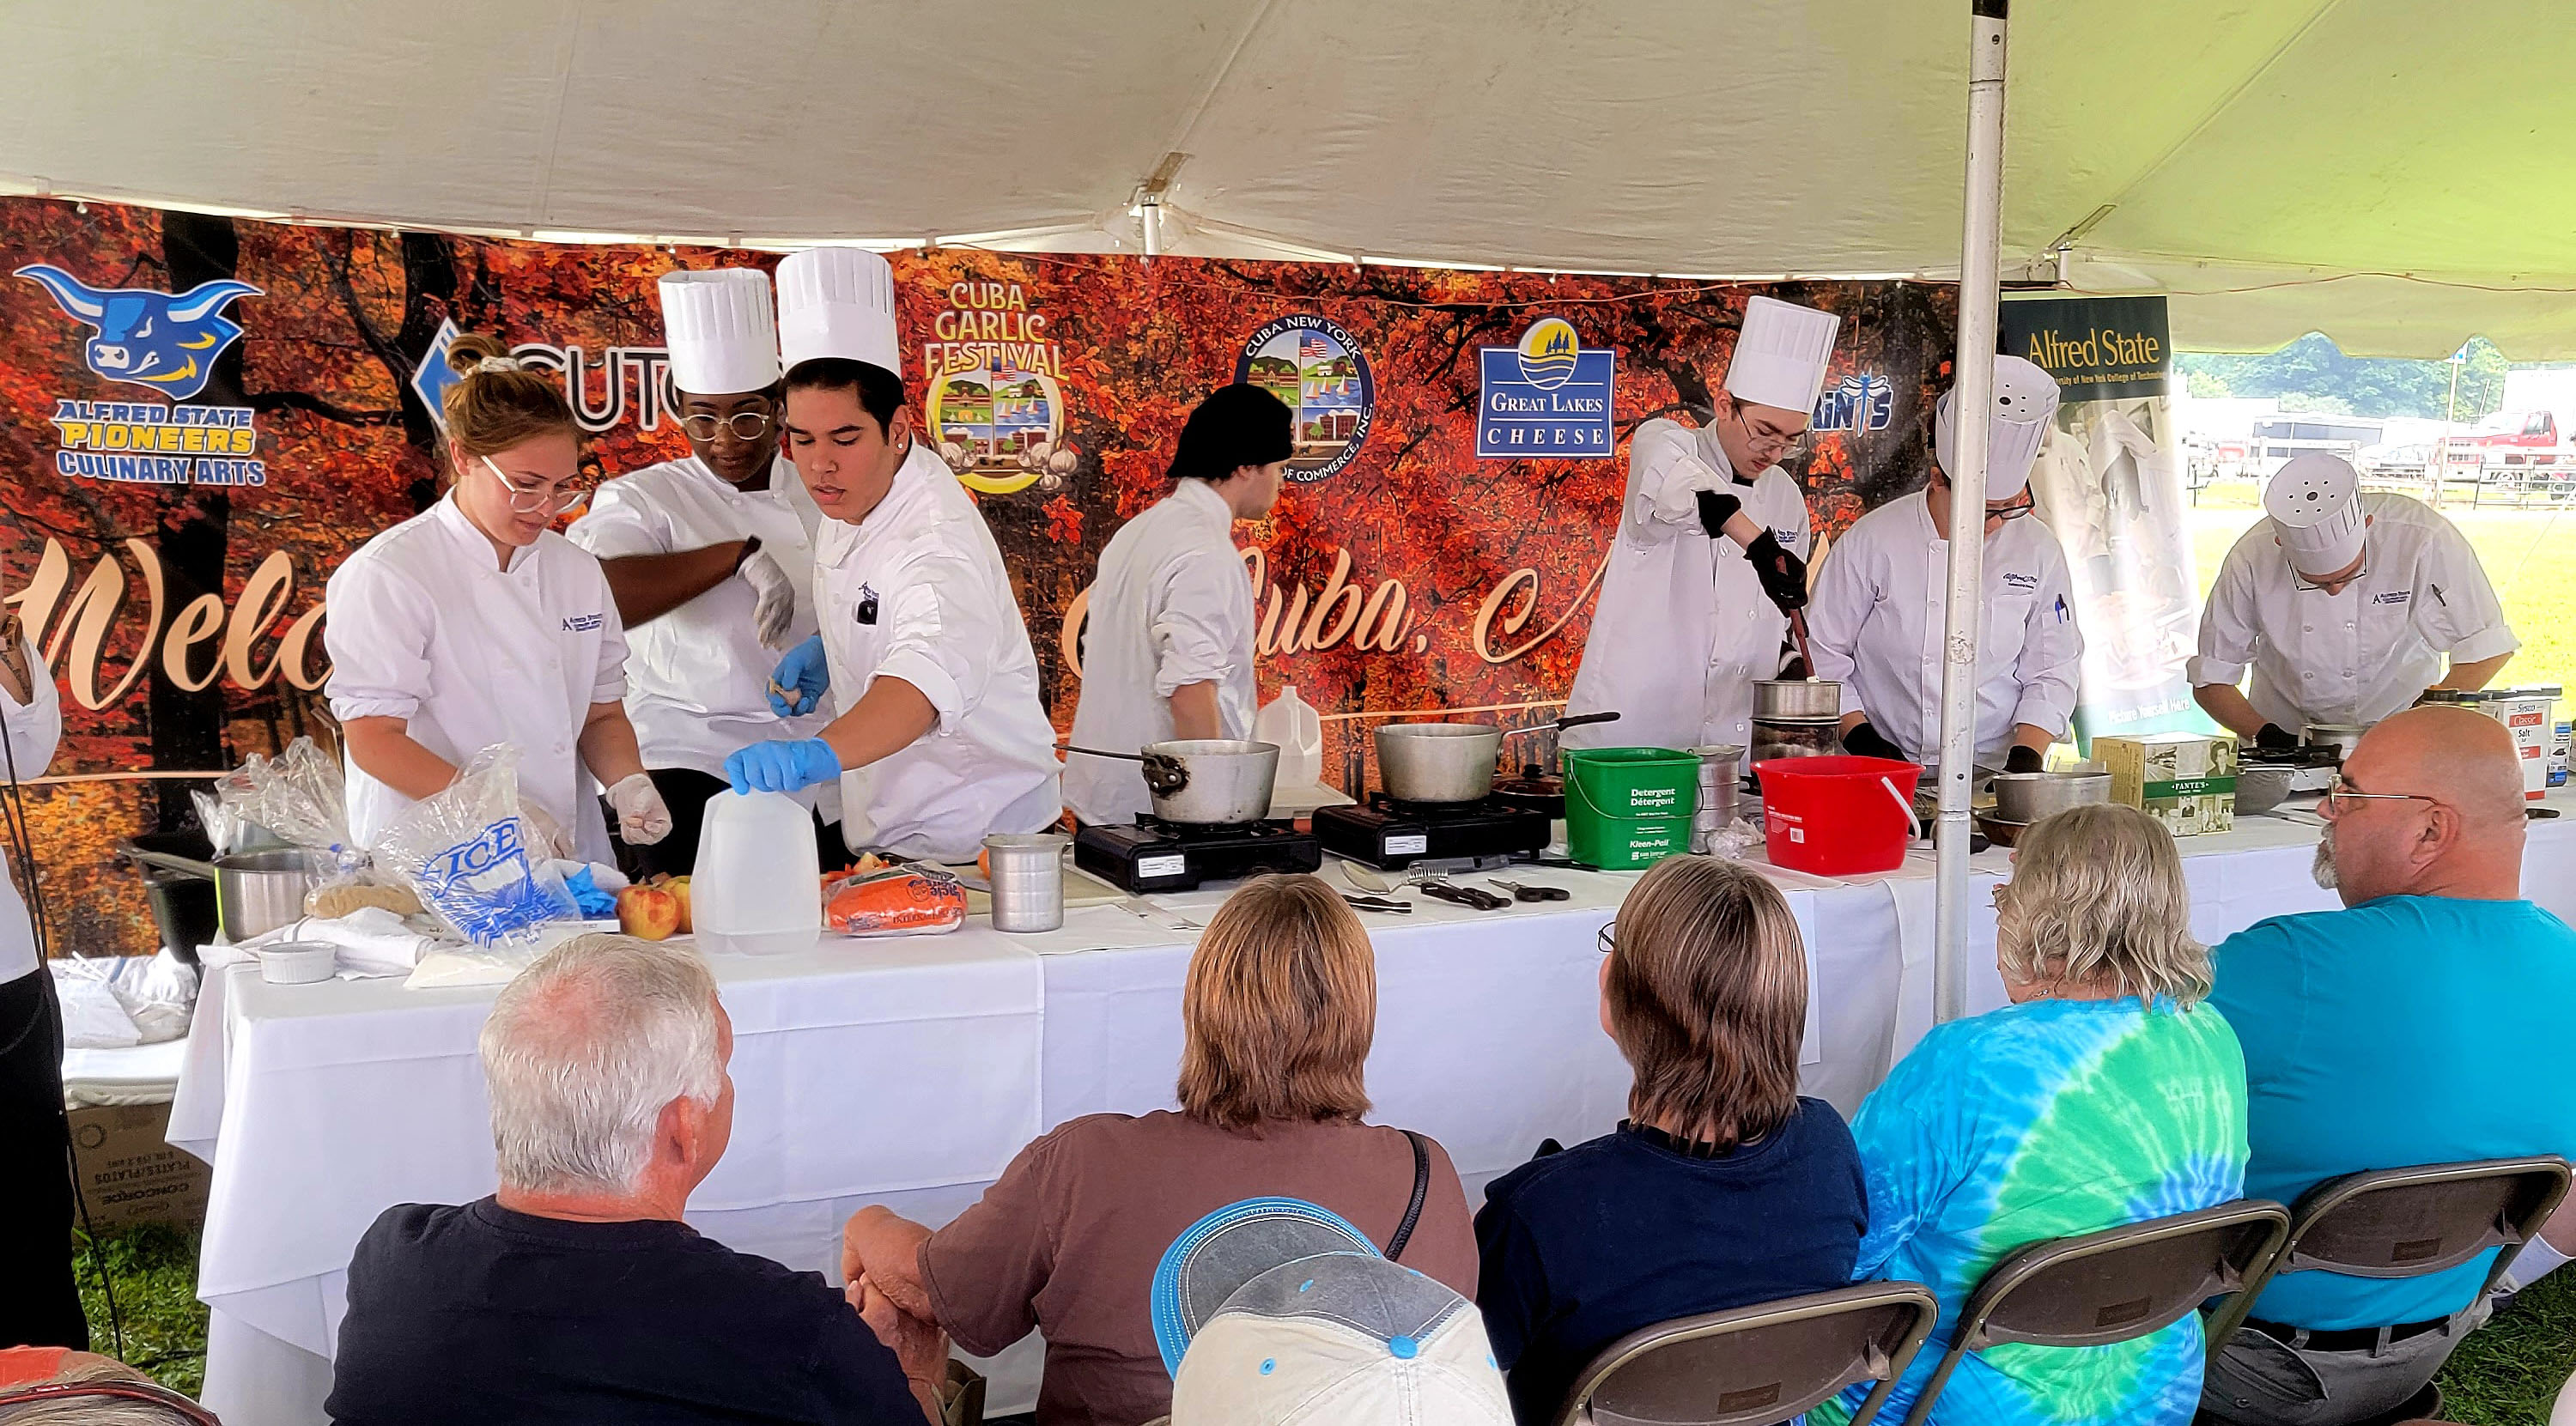 Alfred State students participate in a “Chopped” competition during a past Garlic Festival.